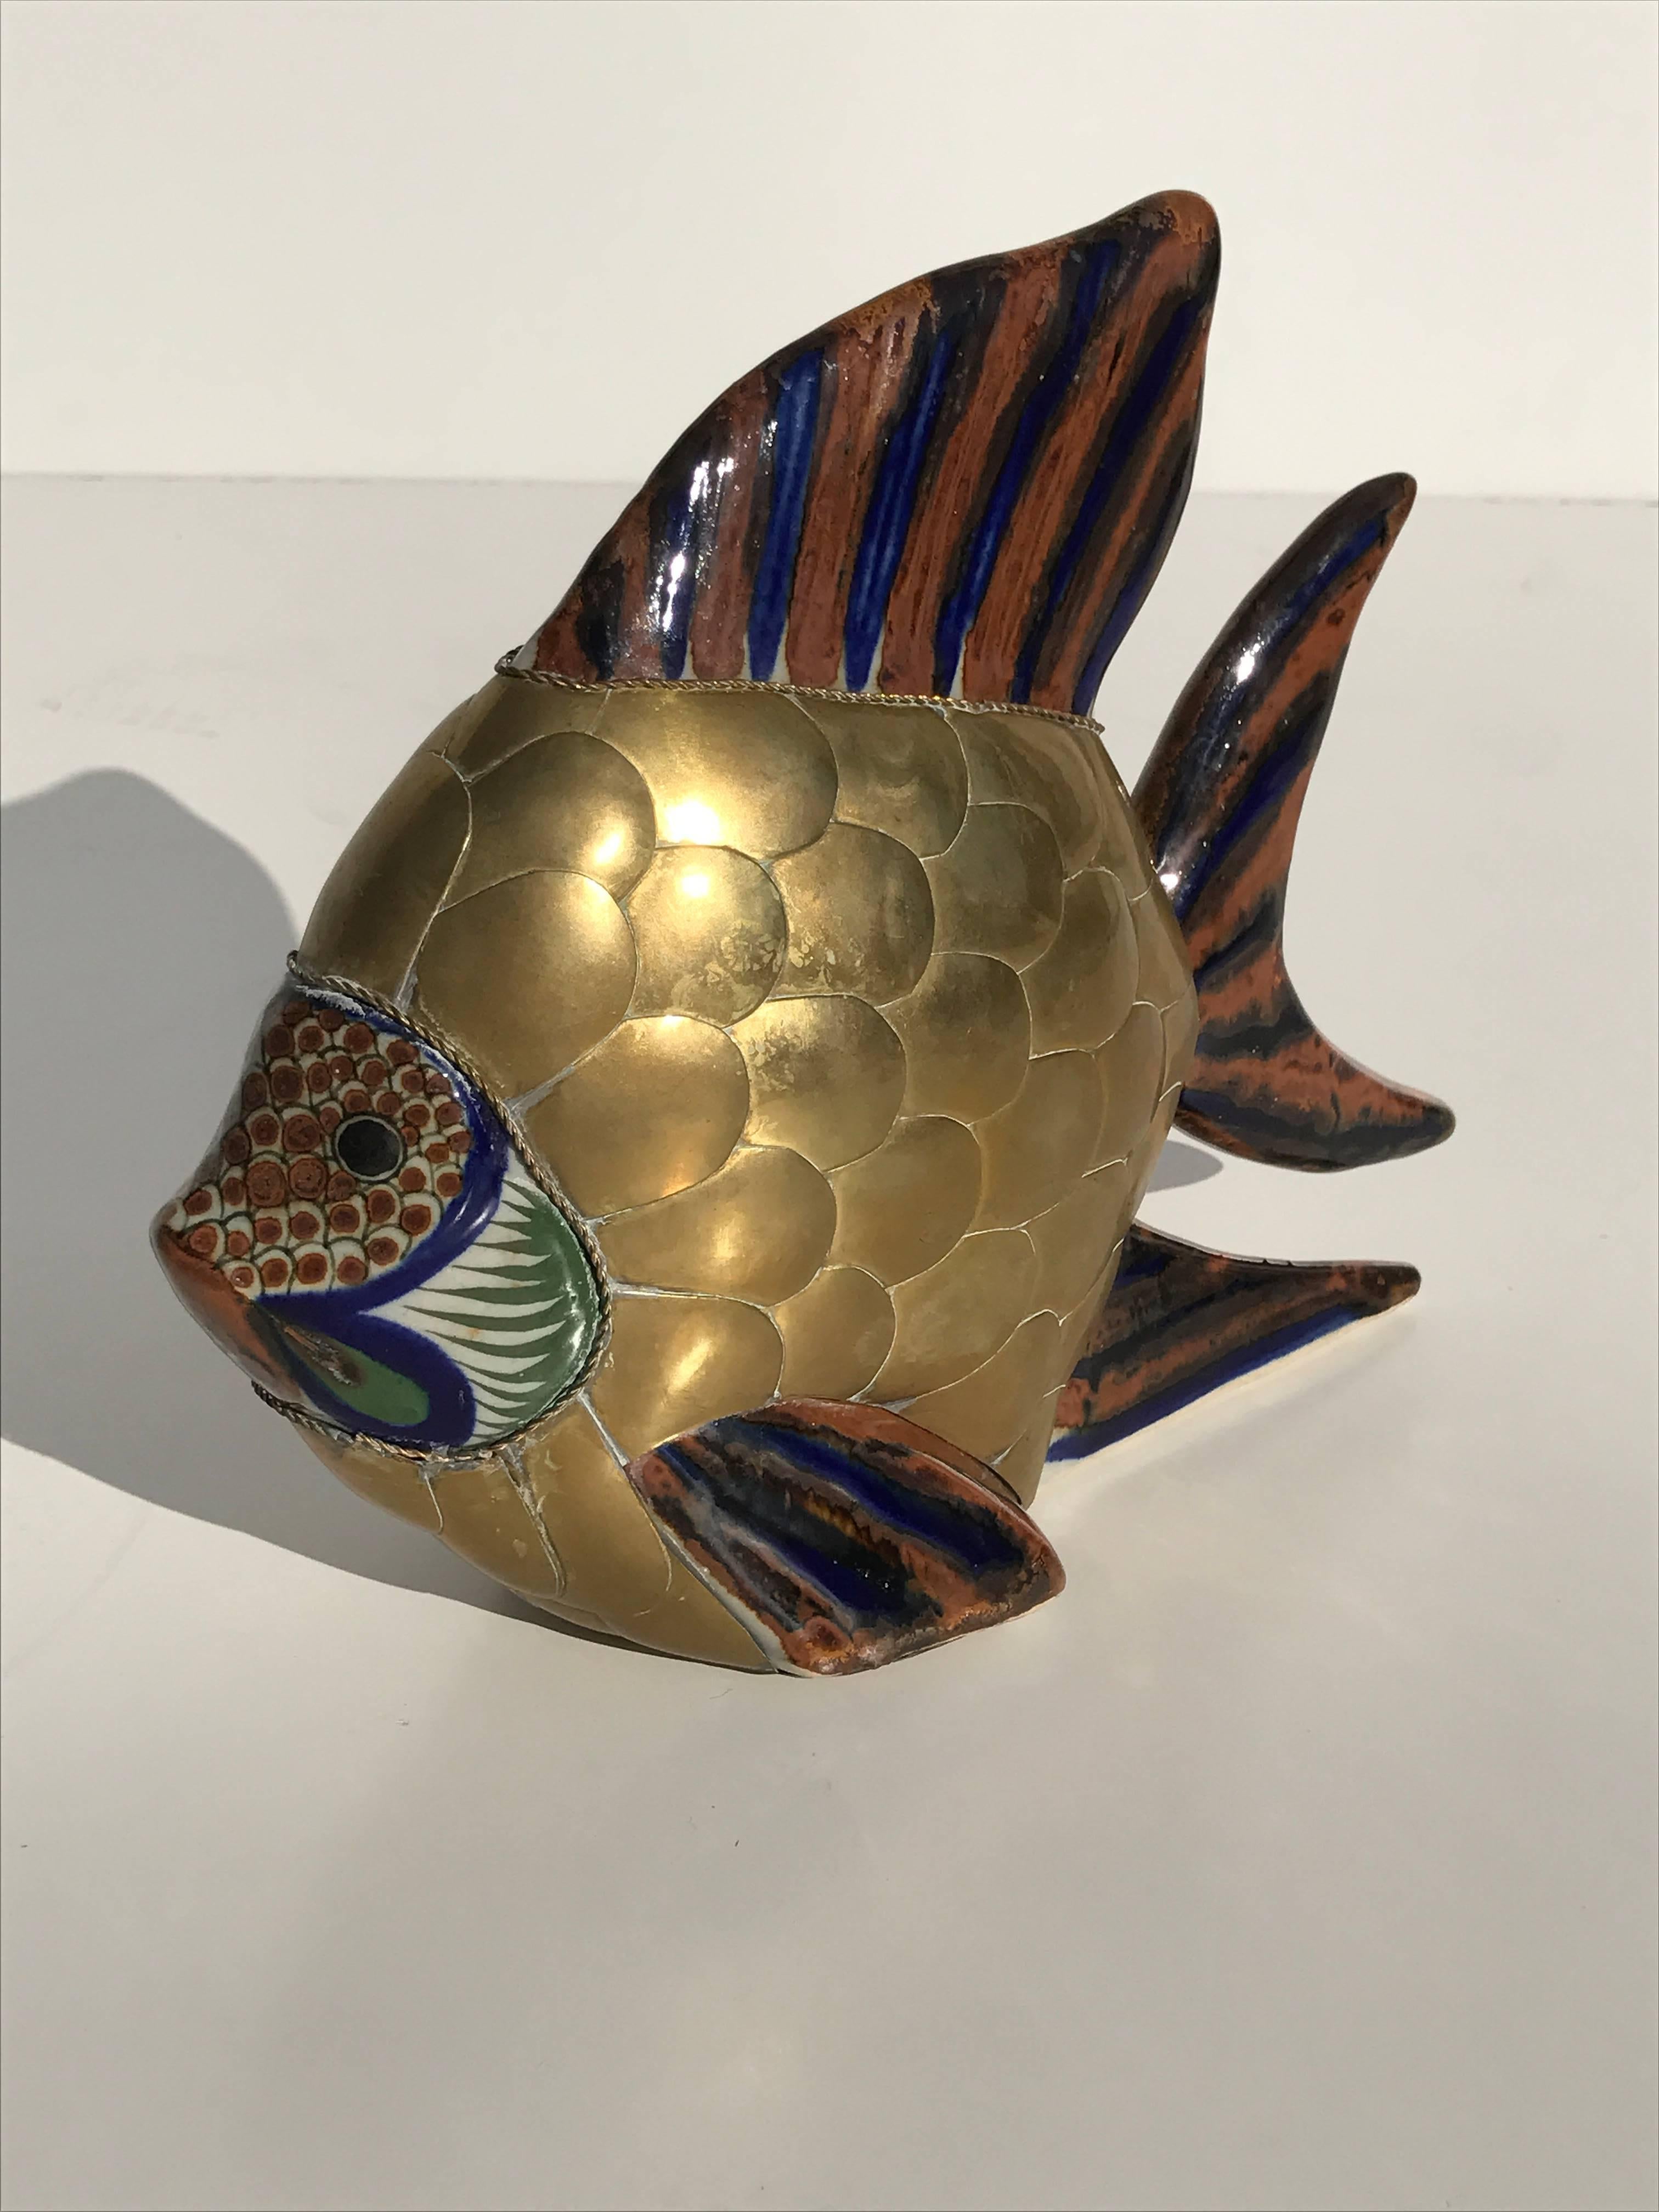 Glazed Pair of Brass and Ceramic Fish Sculptures Attributed to Sergio Bustamante